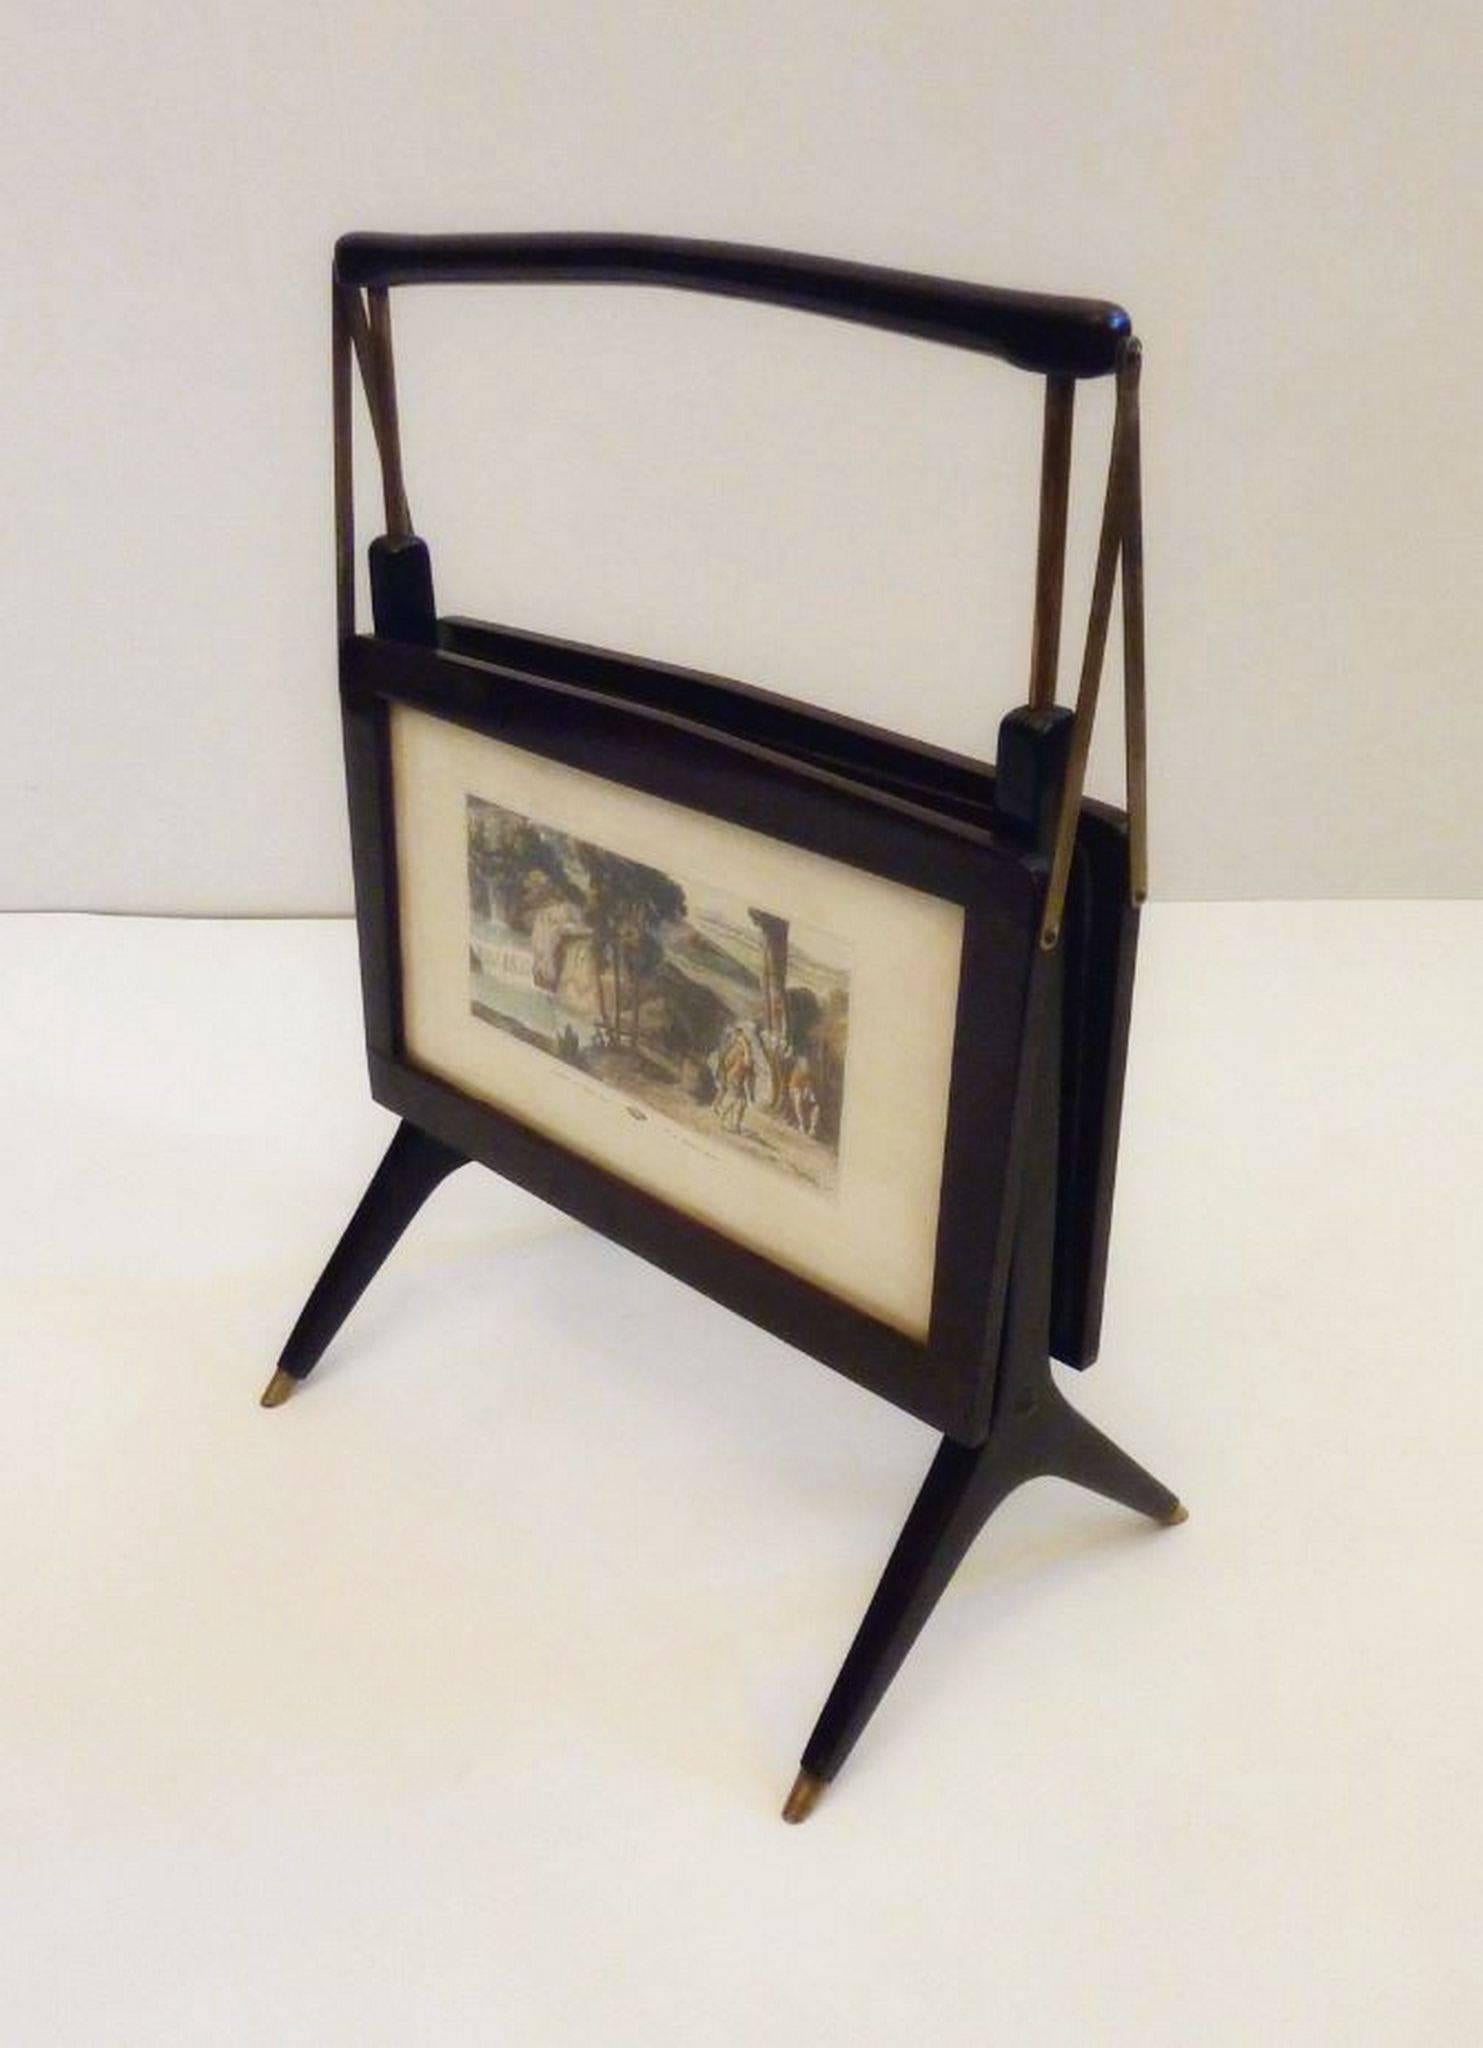 1950s foldable magazine rack in stained beech wood and brass detailing. Features pastoral landscape scenes on each side posted behind glass.